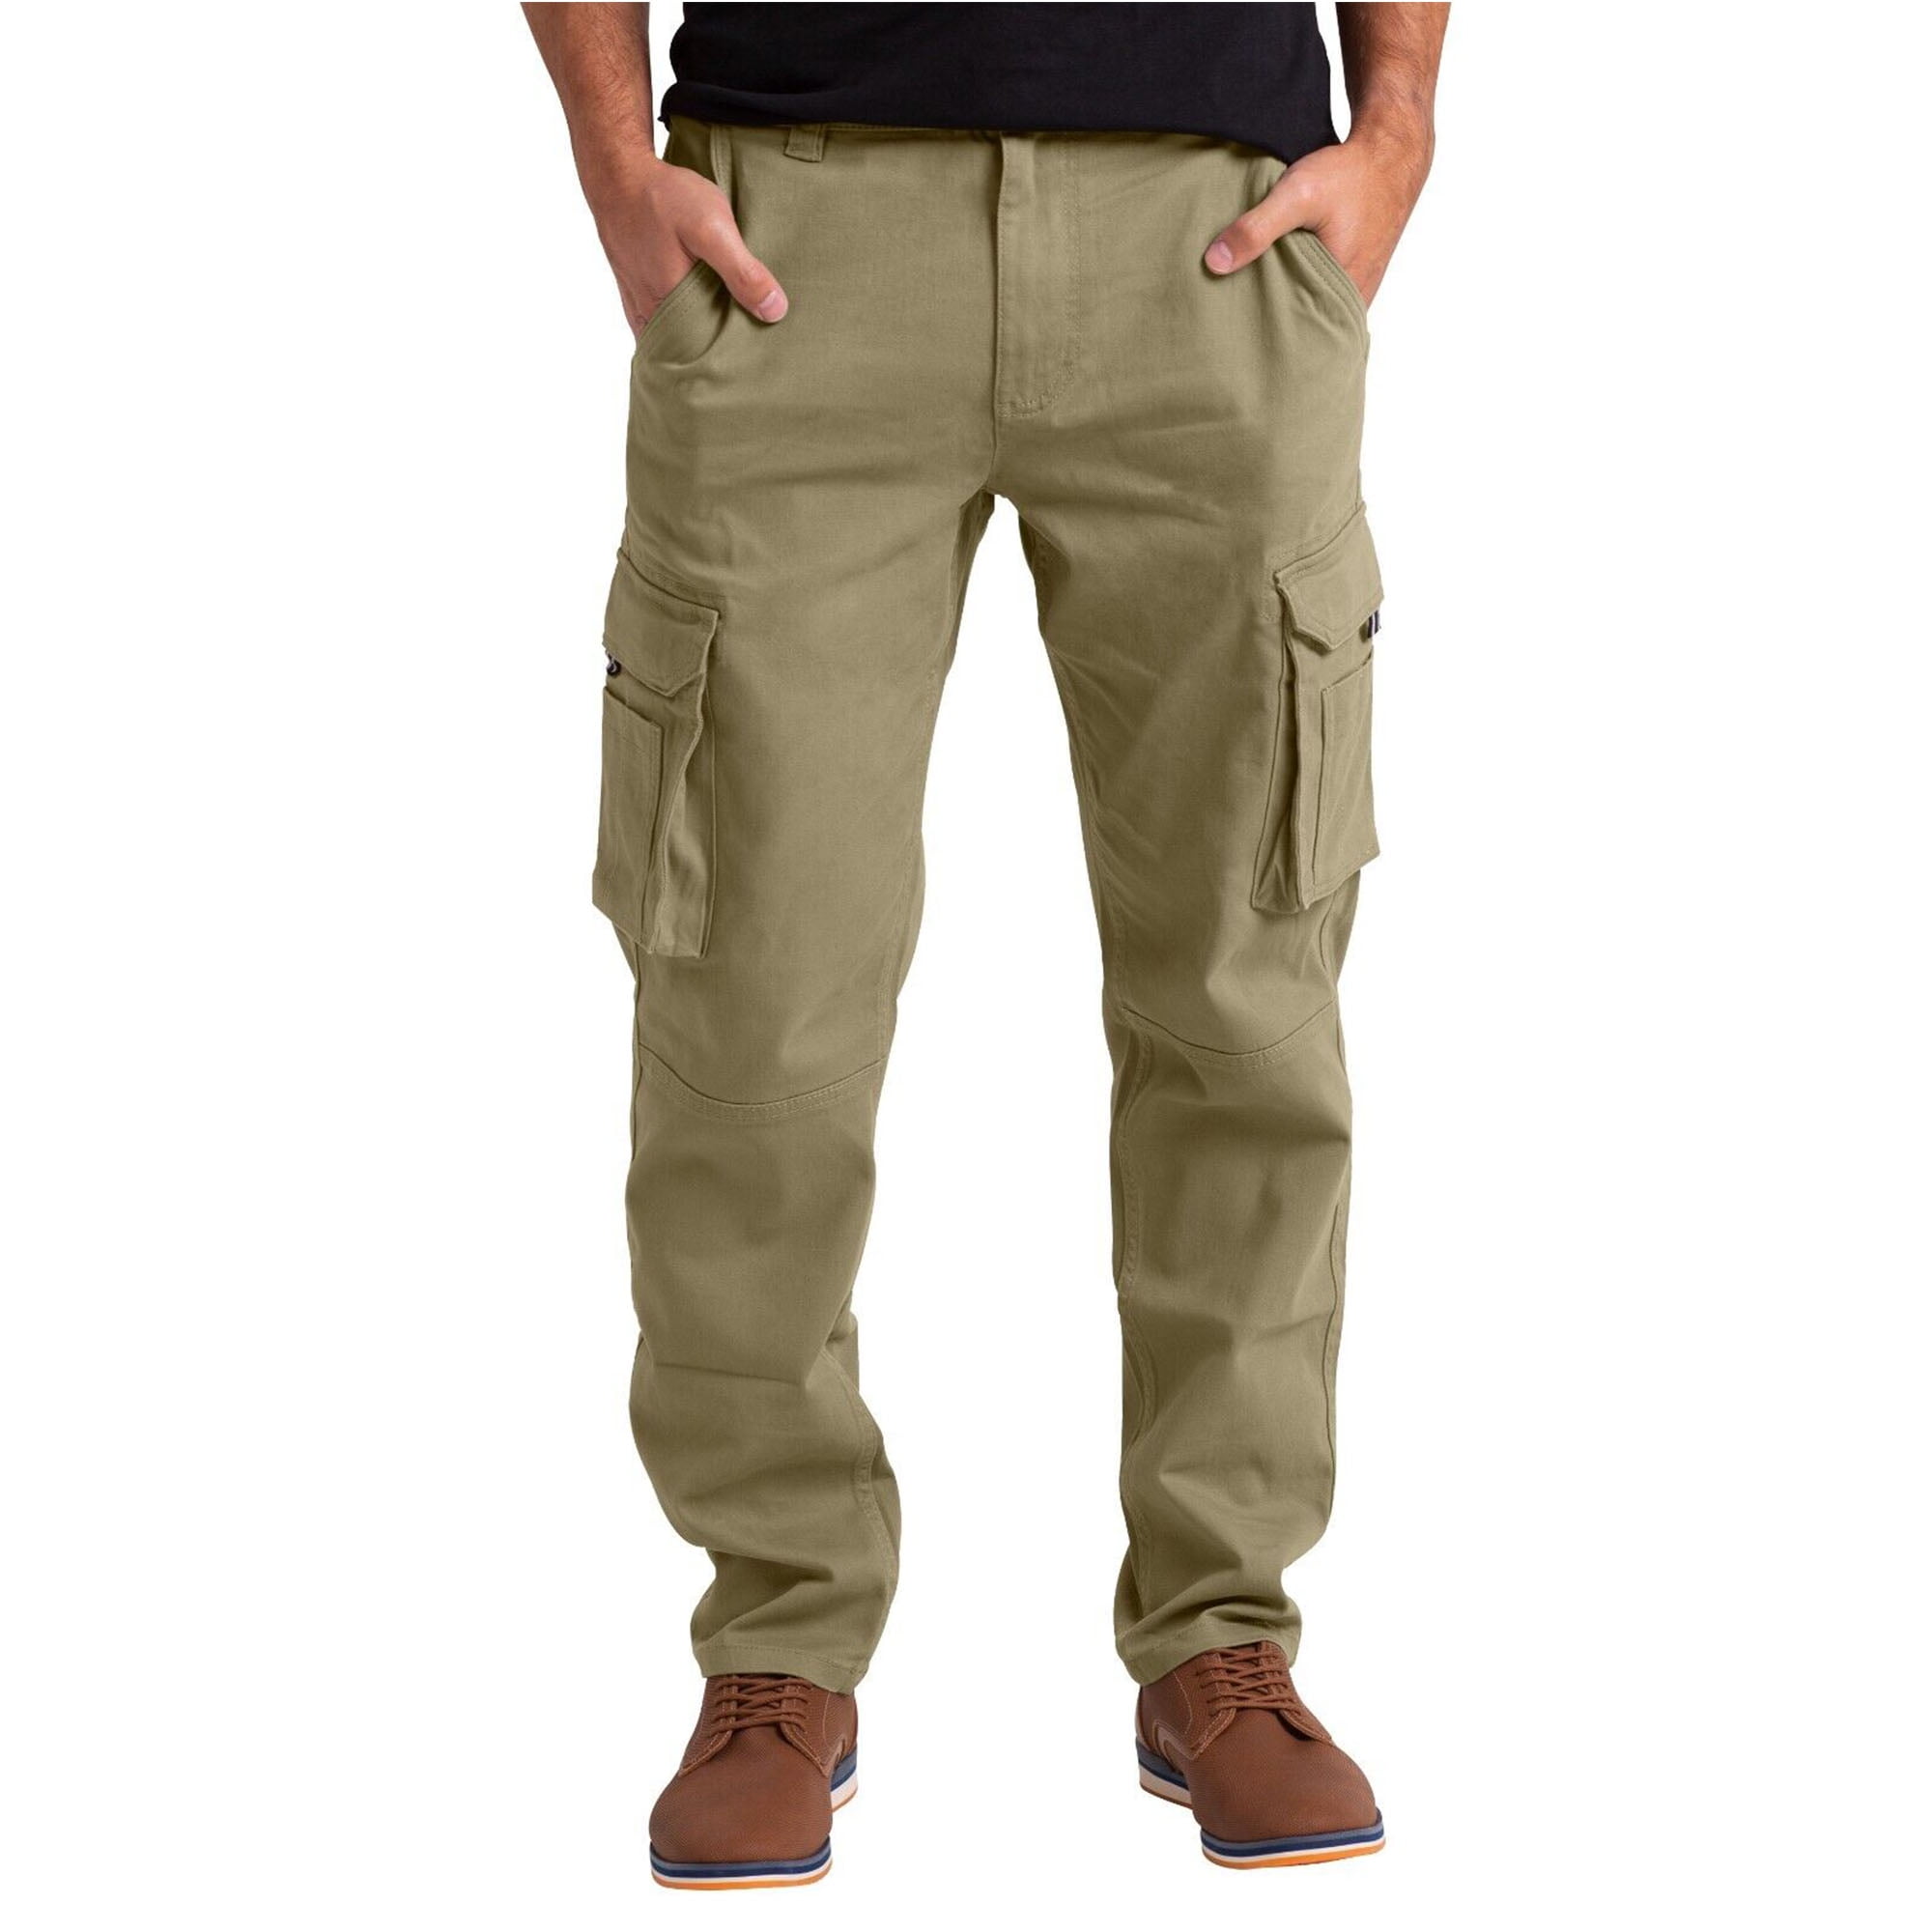 LELINTA Men's Tactical Pants with Cargo Pockets Ripstop, Water ...